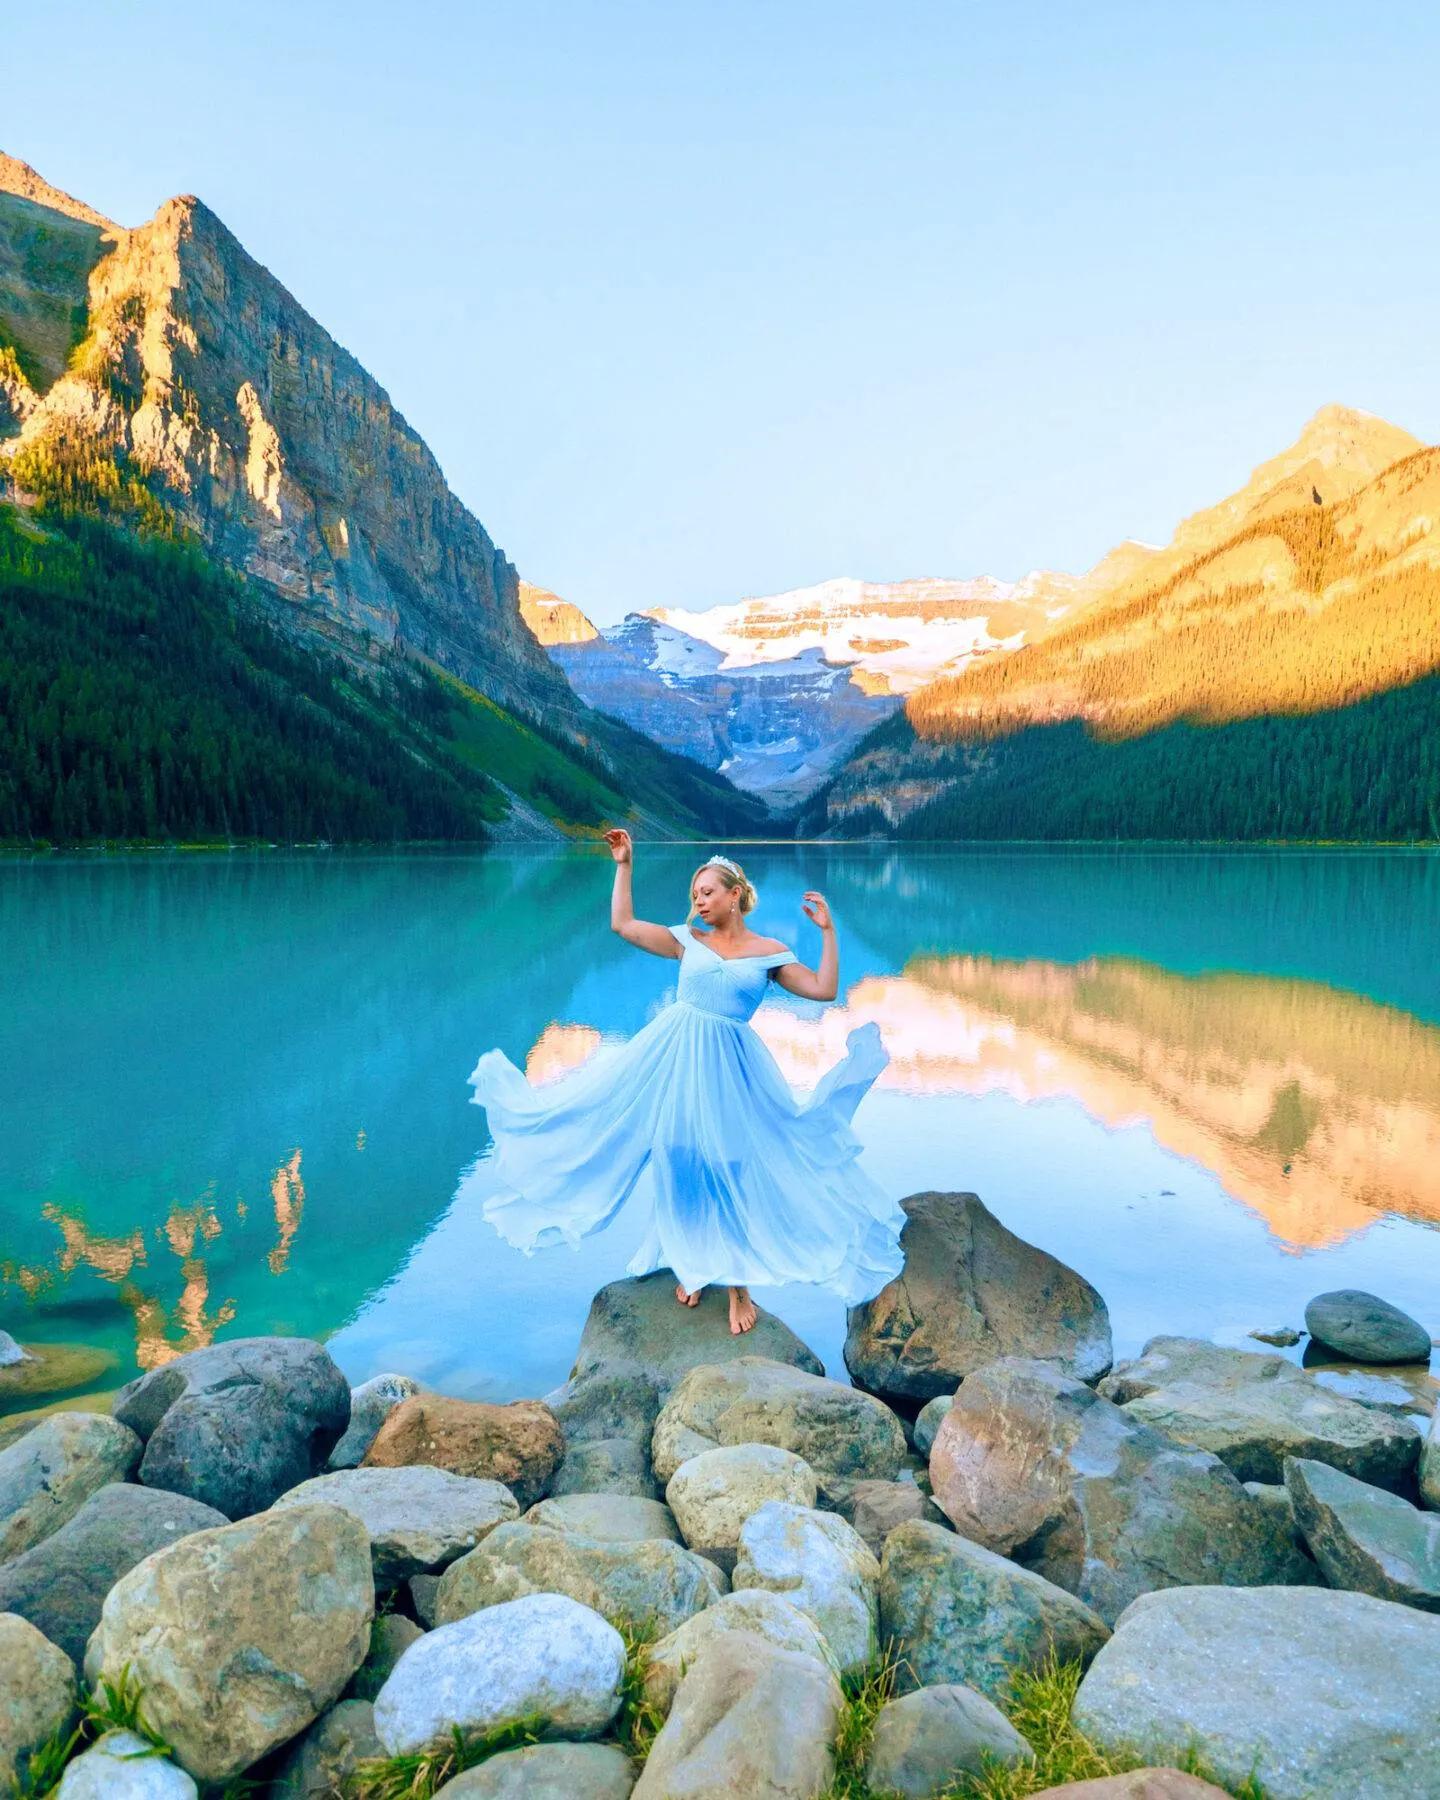 8 Tips for Visiting Lake Louise, Canada